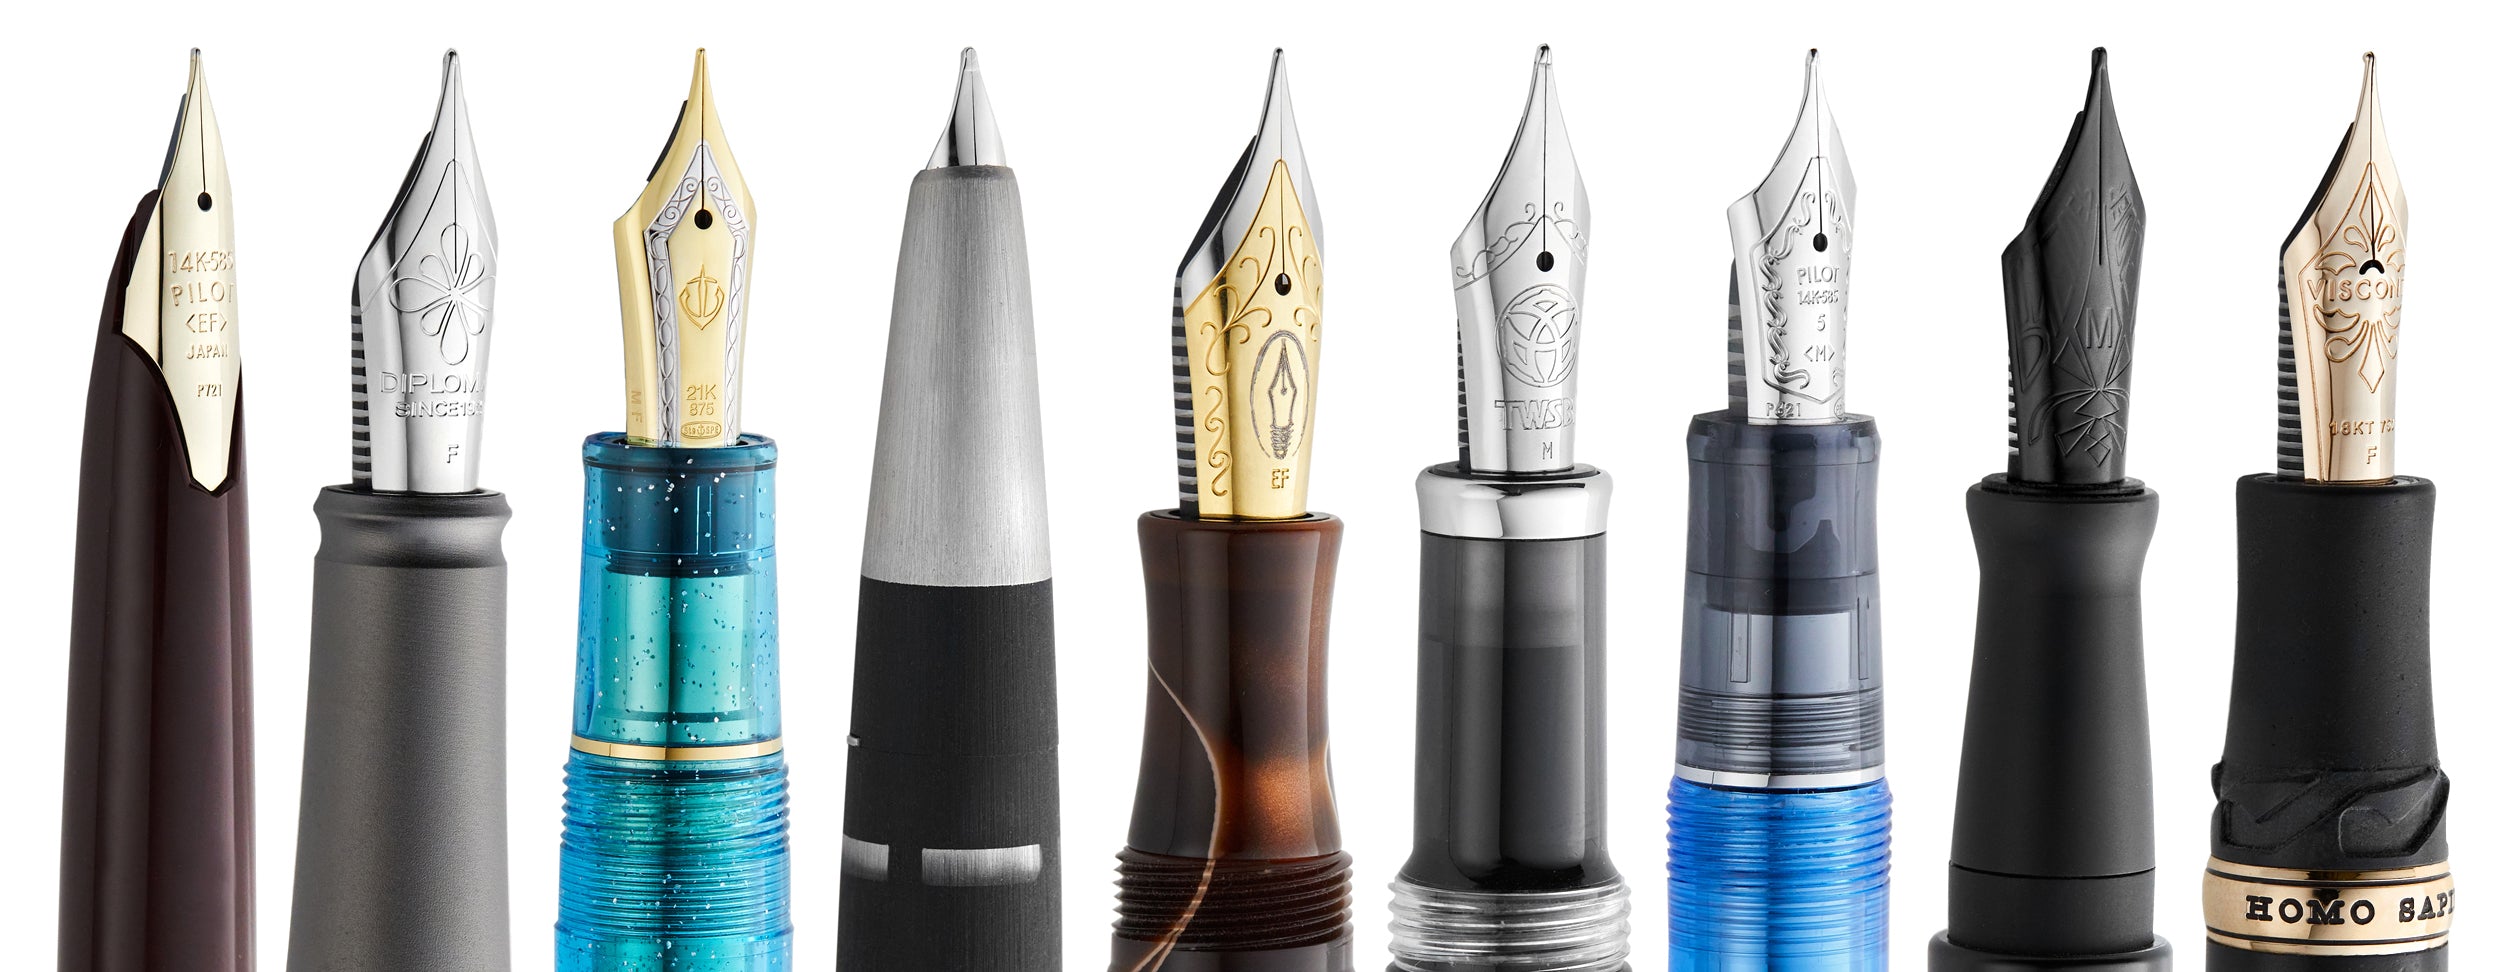 Fountain pen nibs lined up